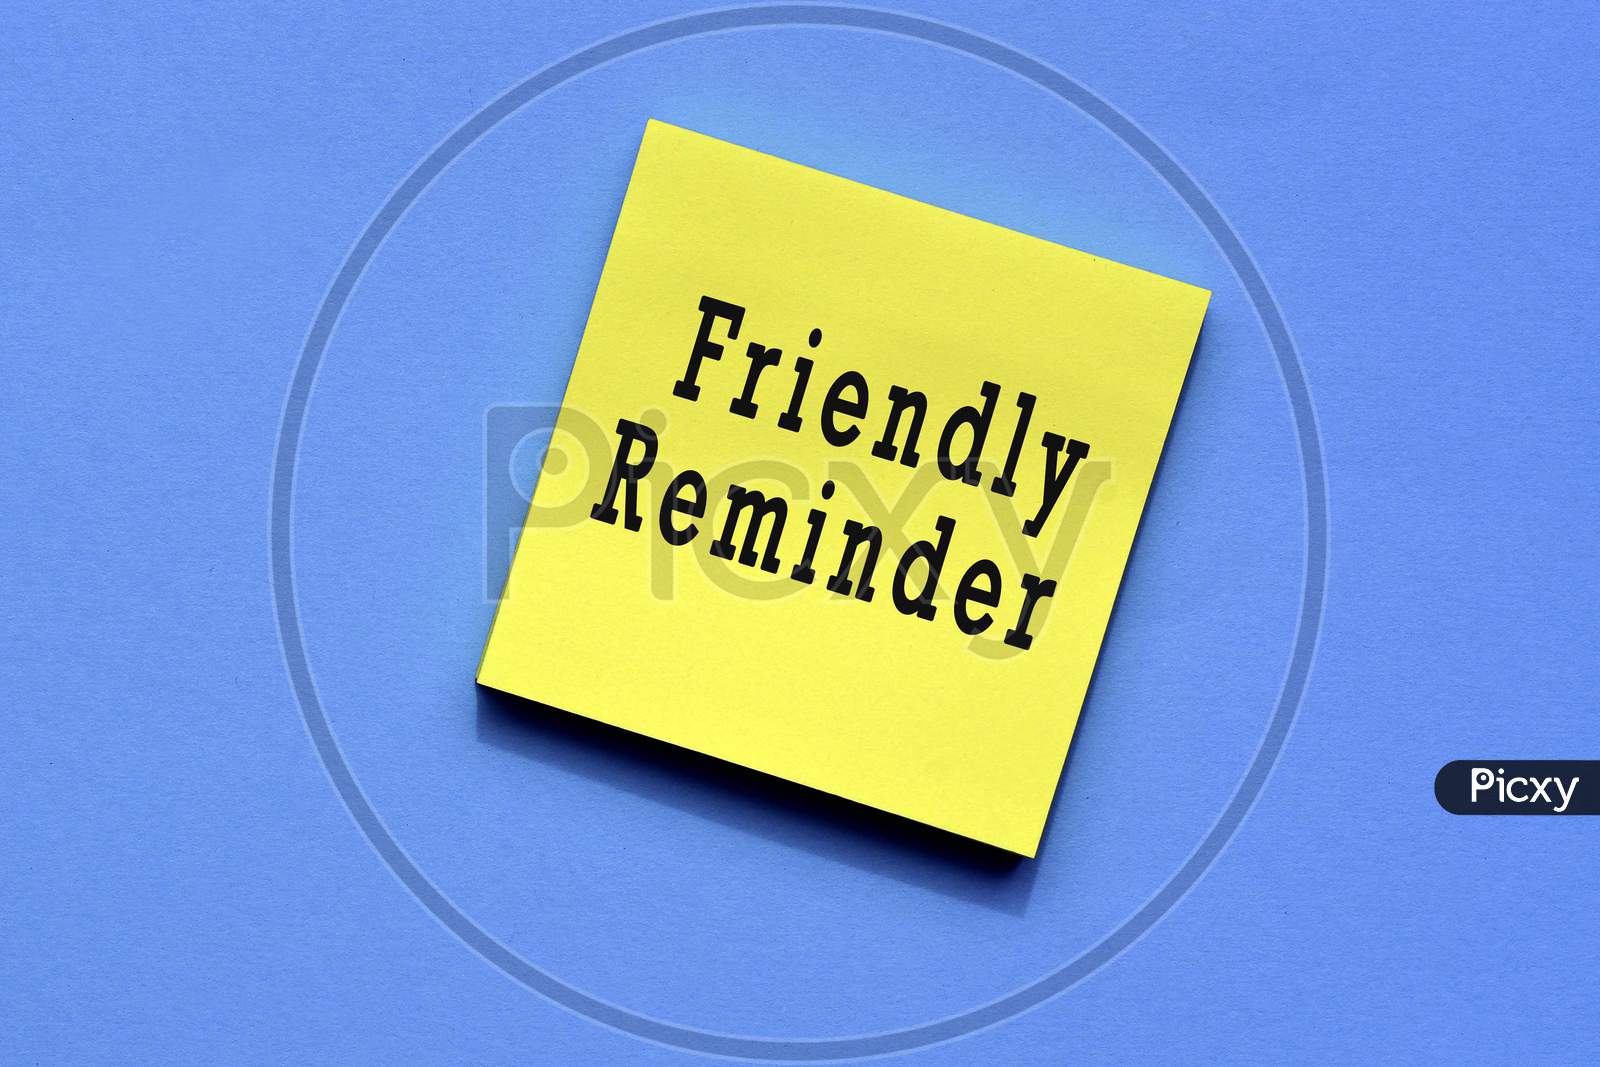 reminder text on yellow sticky note with blue background